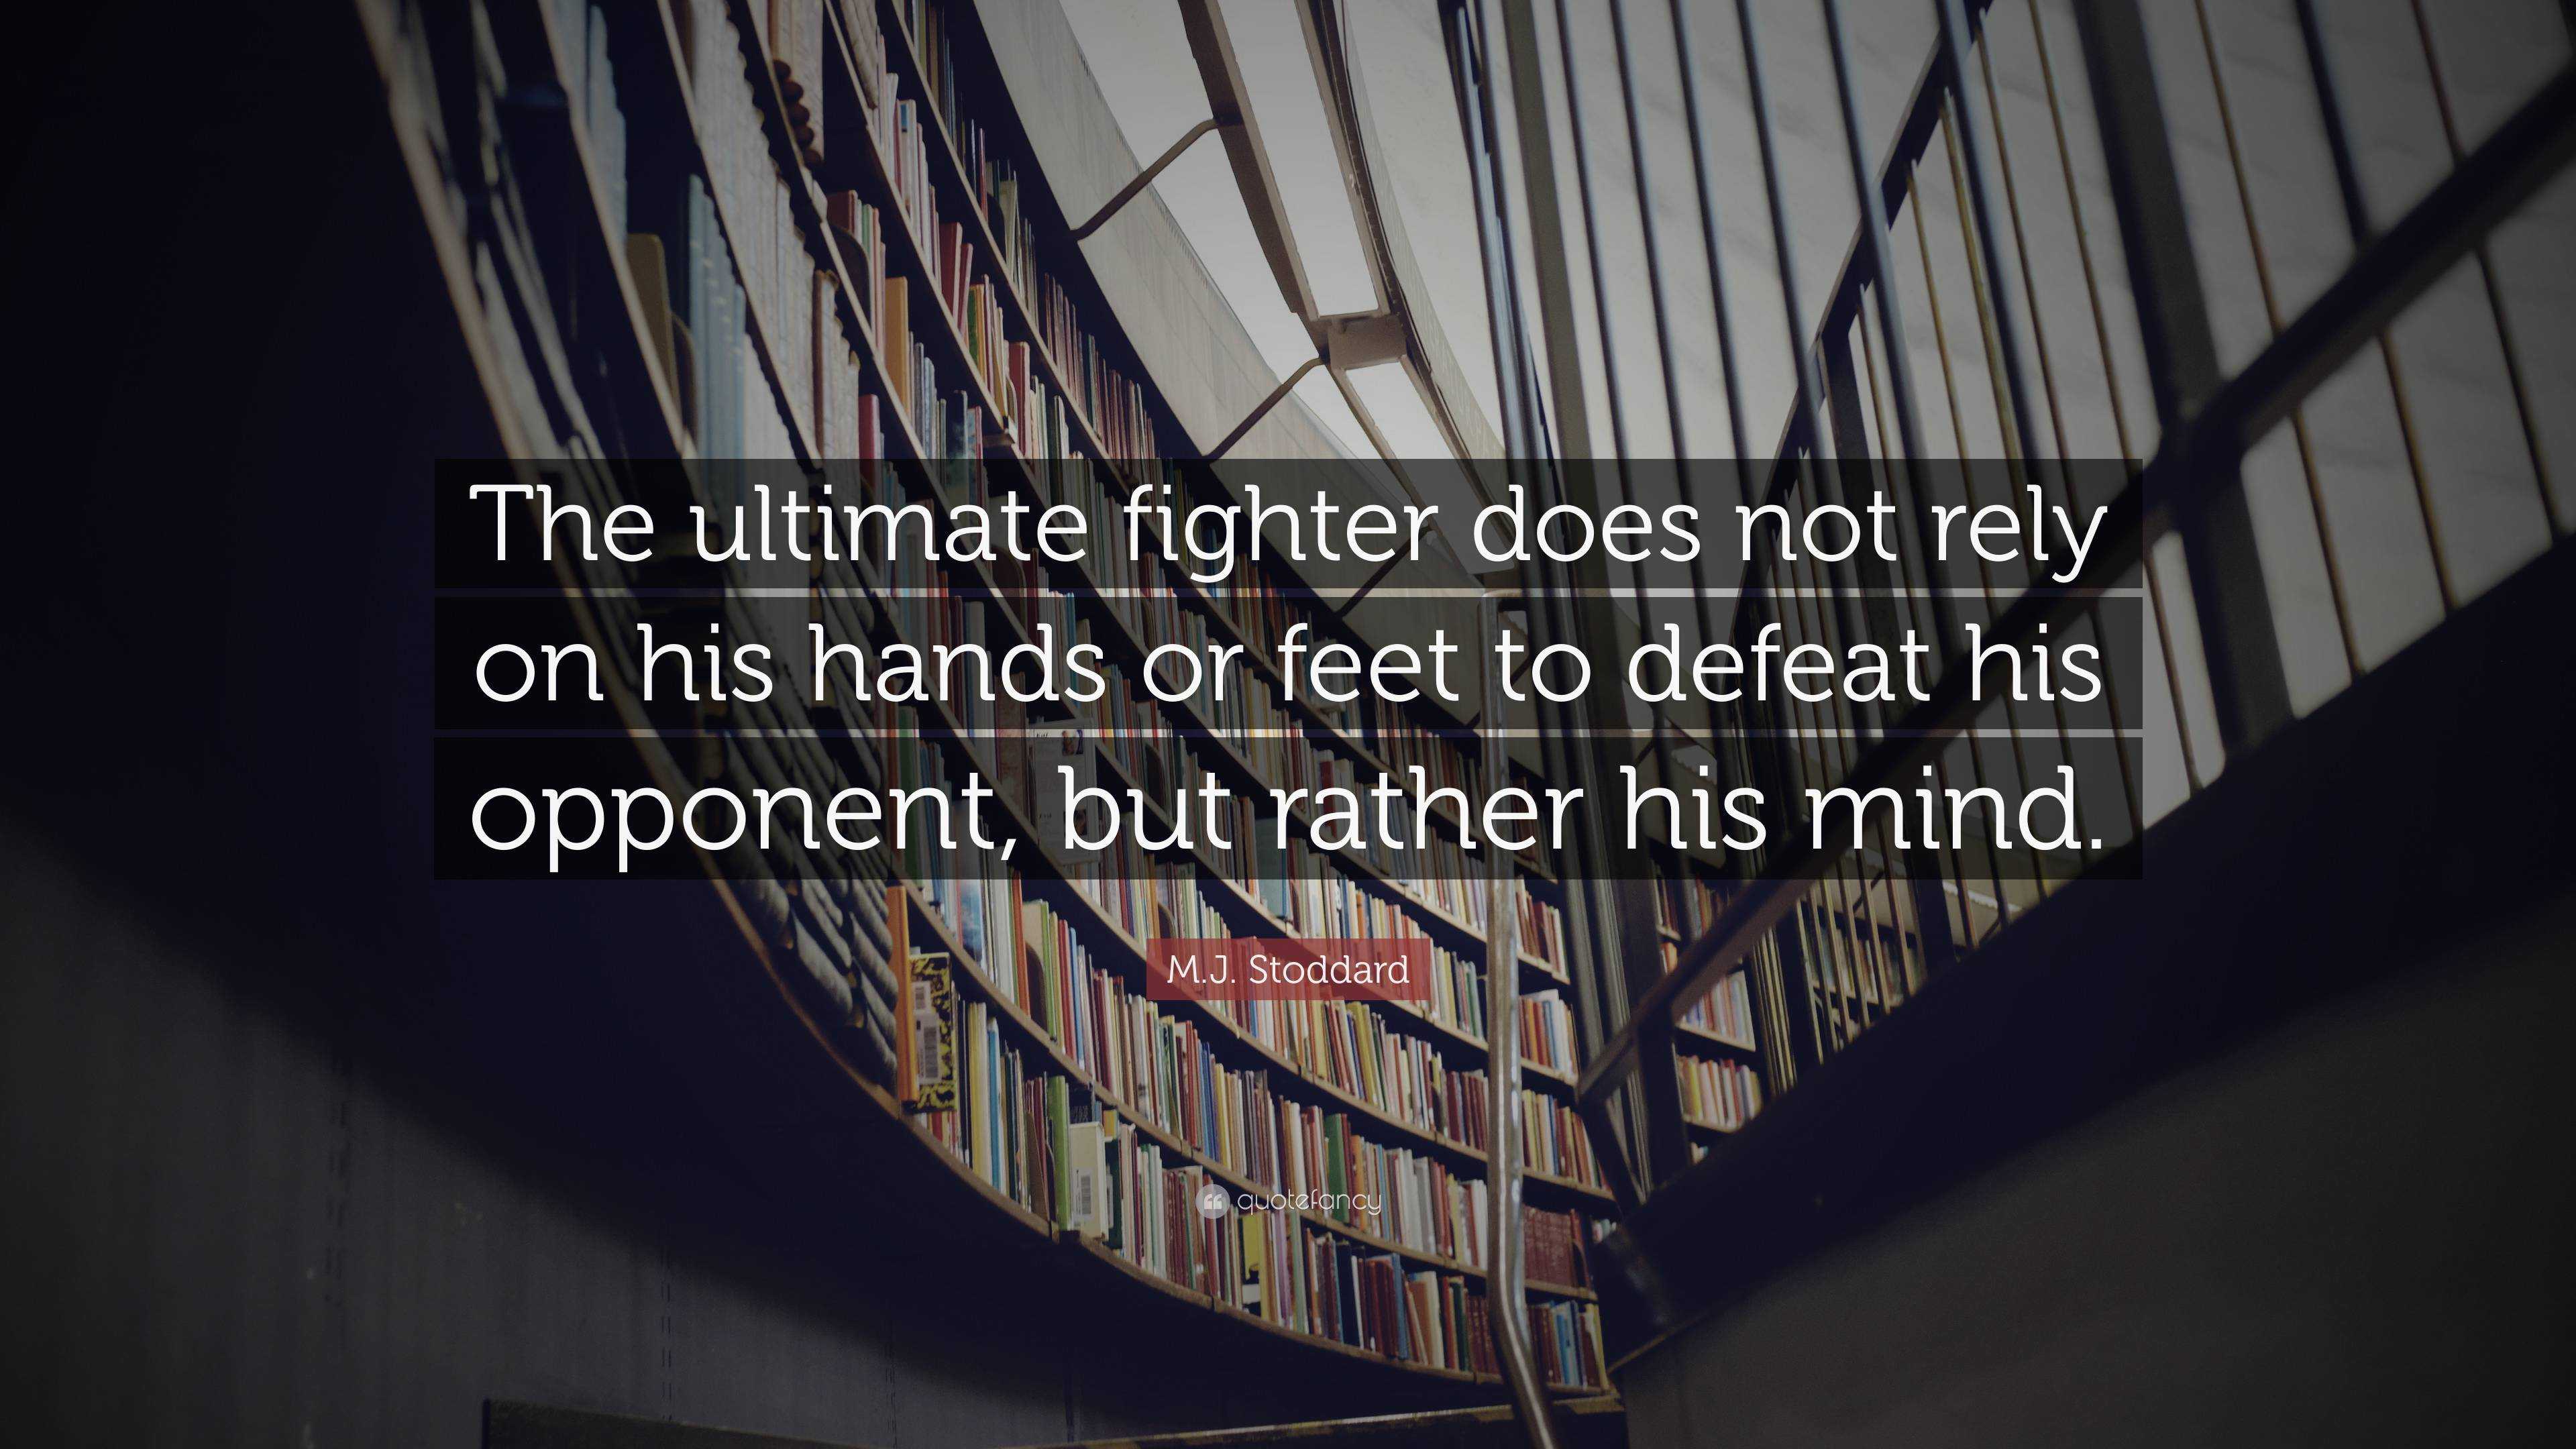 M.J. Stoddard Quote: “The ultimate fighter does not rely on his hands or  feet to defeat